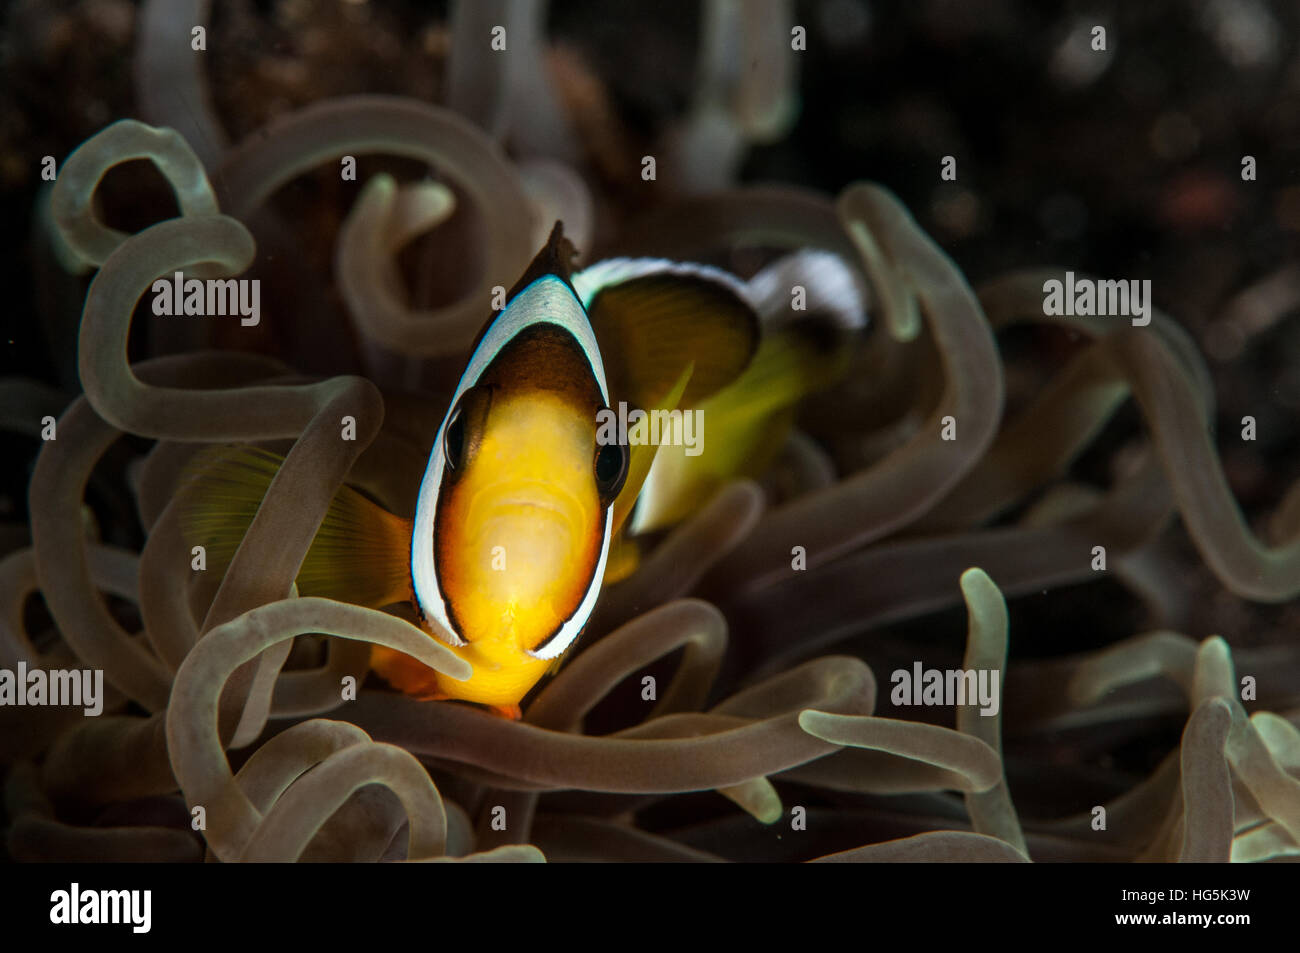 Barrier reef anemonefish (Amphiprion akindynos) in Bali, Indonesia Stock Photo